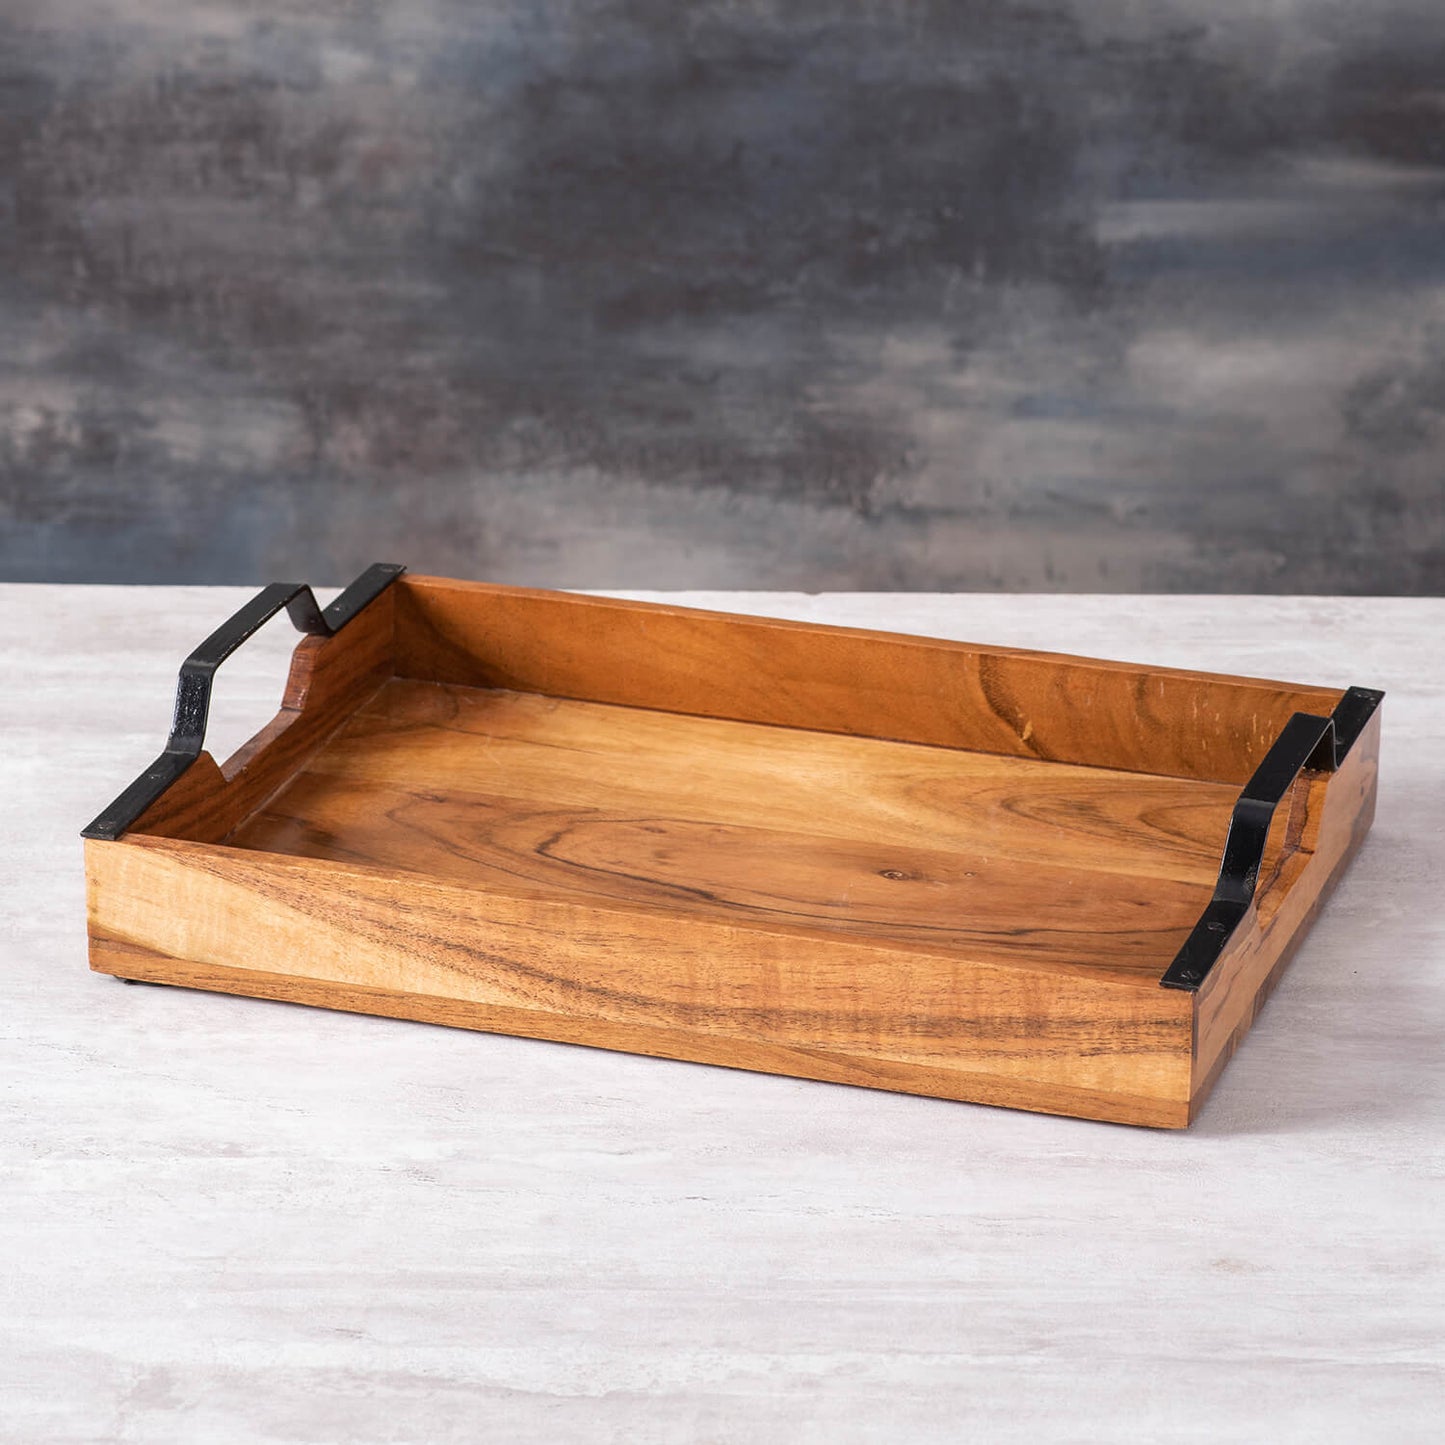 JISCOVERY Acacia Wood Serving Tray with Black Iron Handles| Rectangular Snacks Serving Platter Tray| Eco-Friendly| Multi-Purpose Decorative Tray| Size- 35x25x5 CM